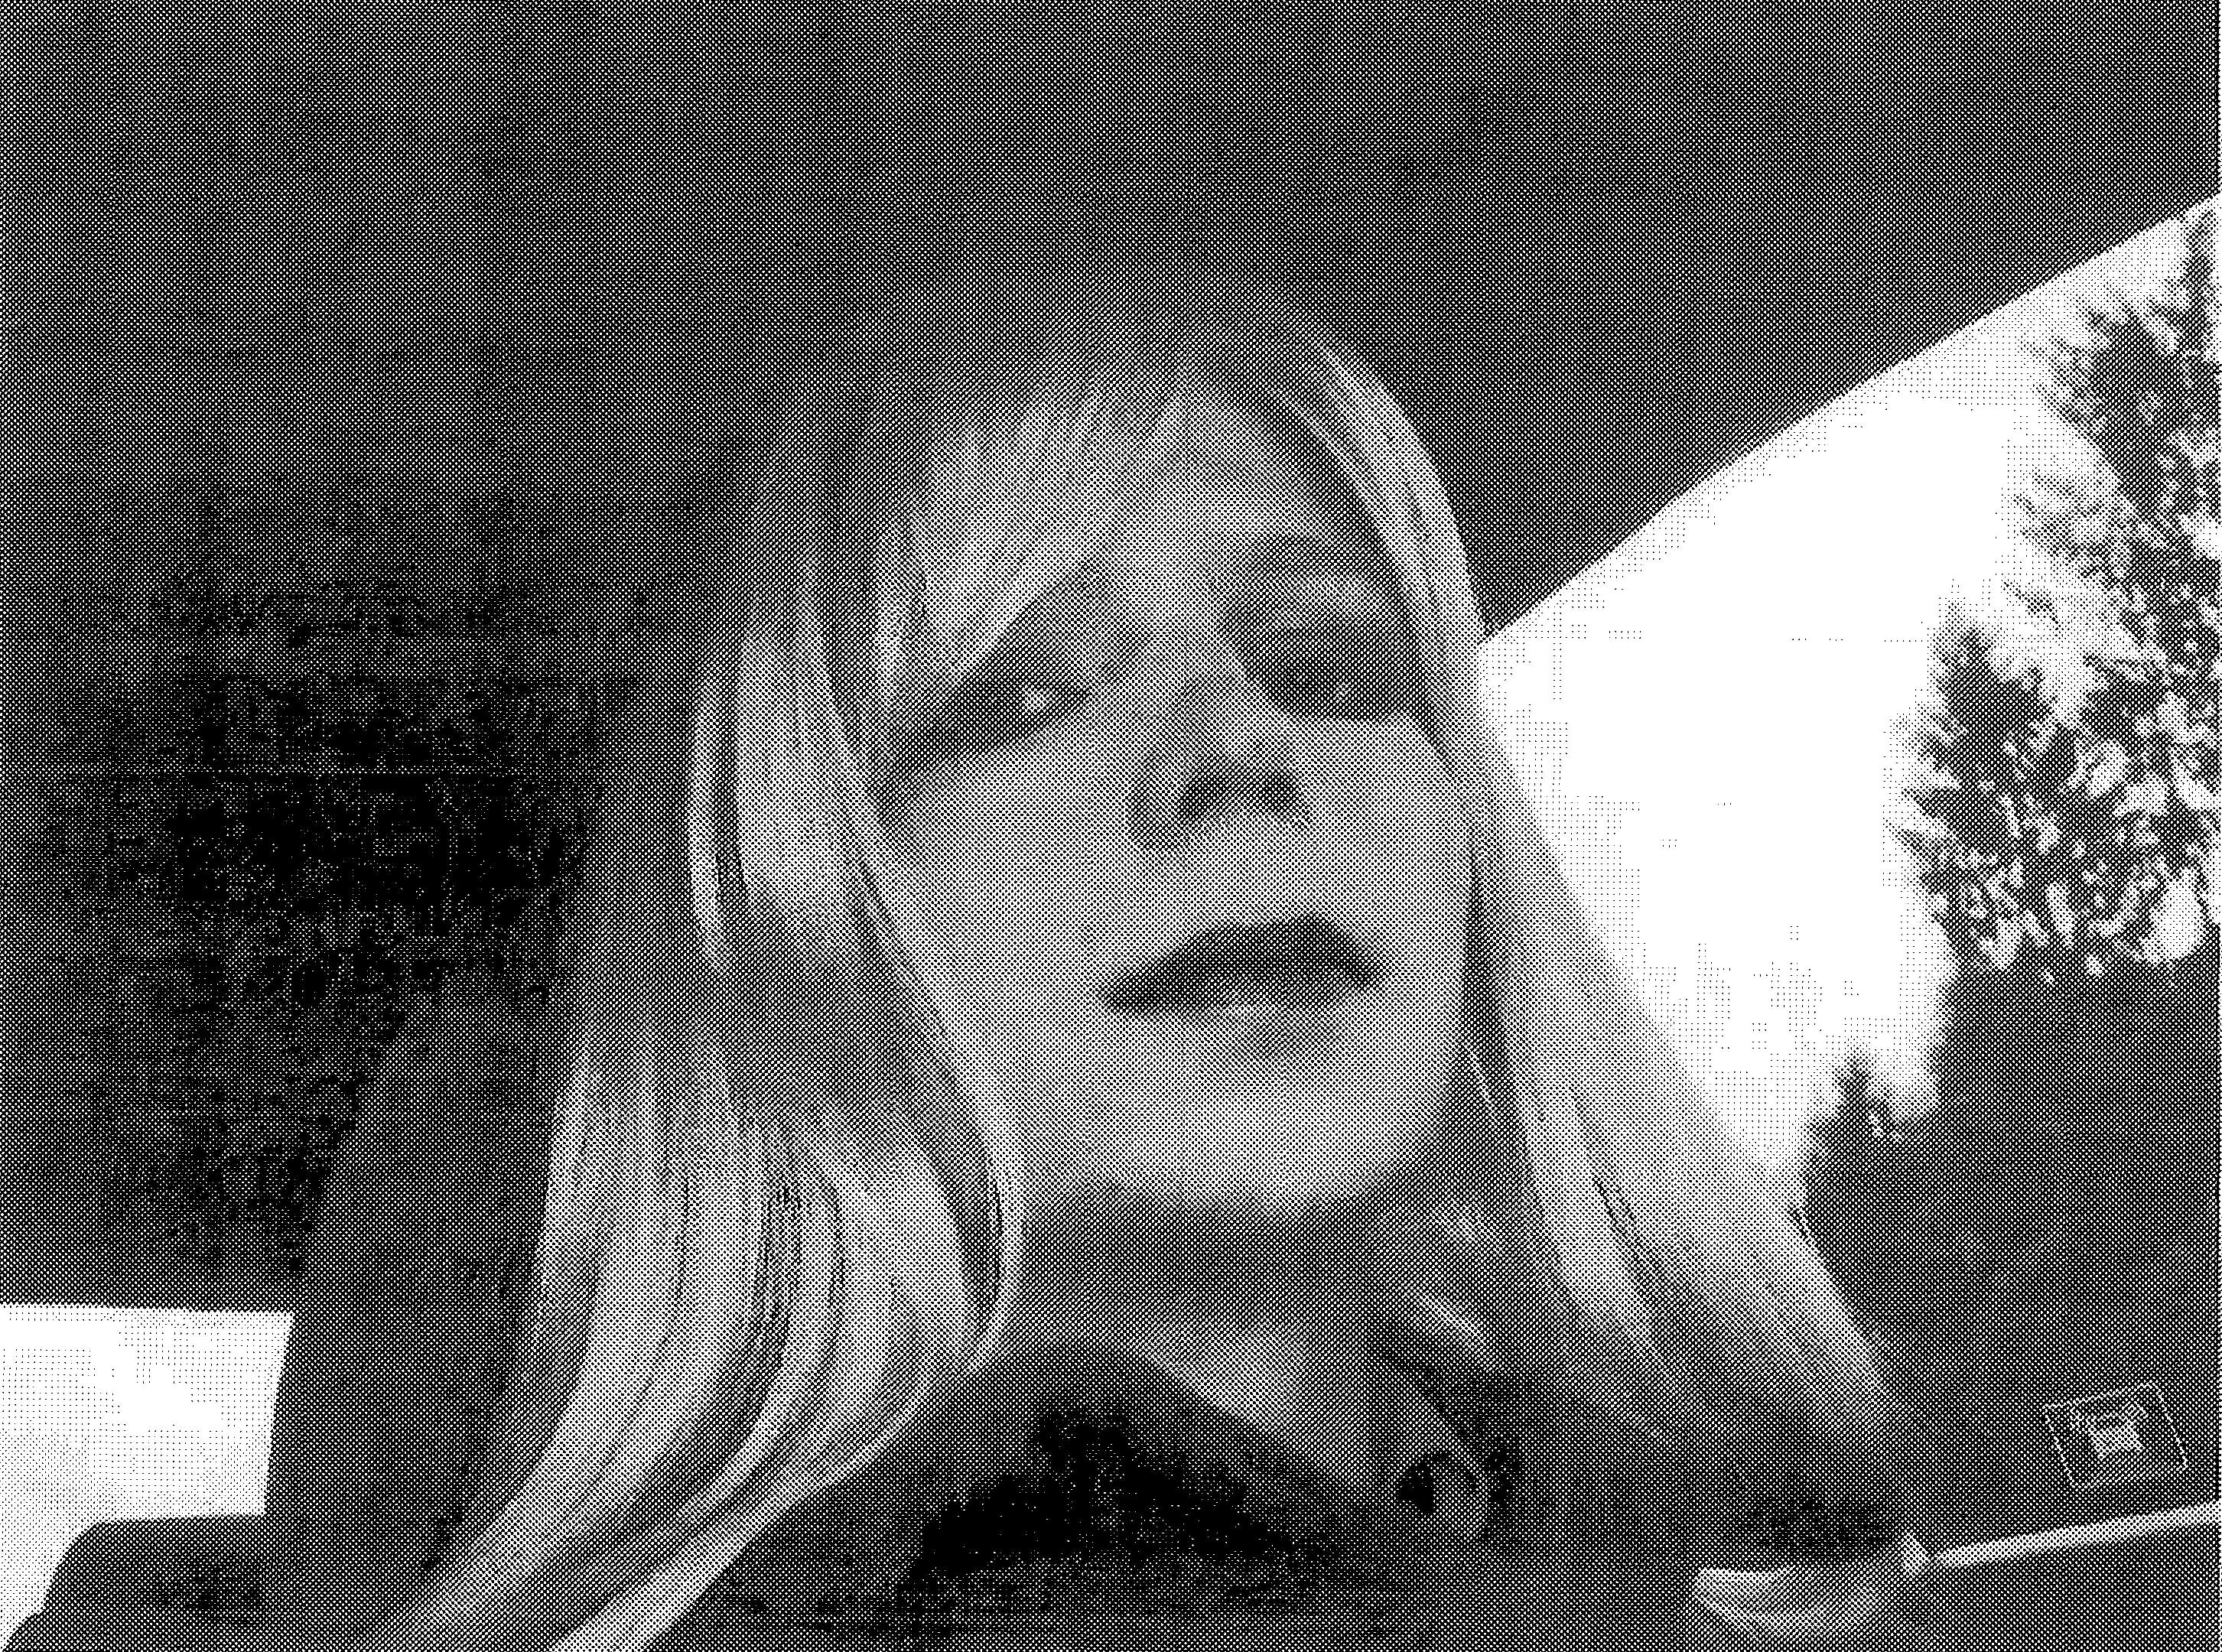 U.S. Army Private First Class Chelsea Manning in 2010. (U.S. Army/Reuters)